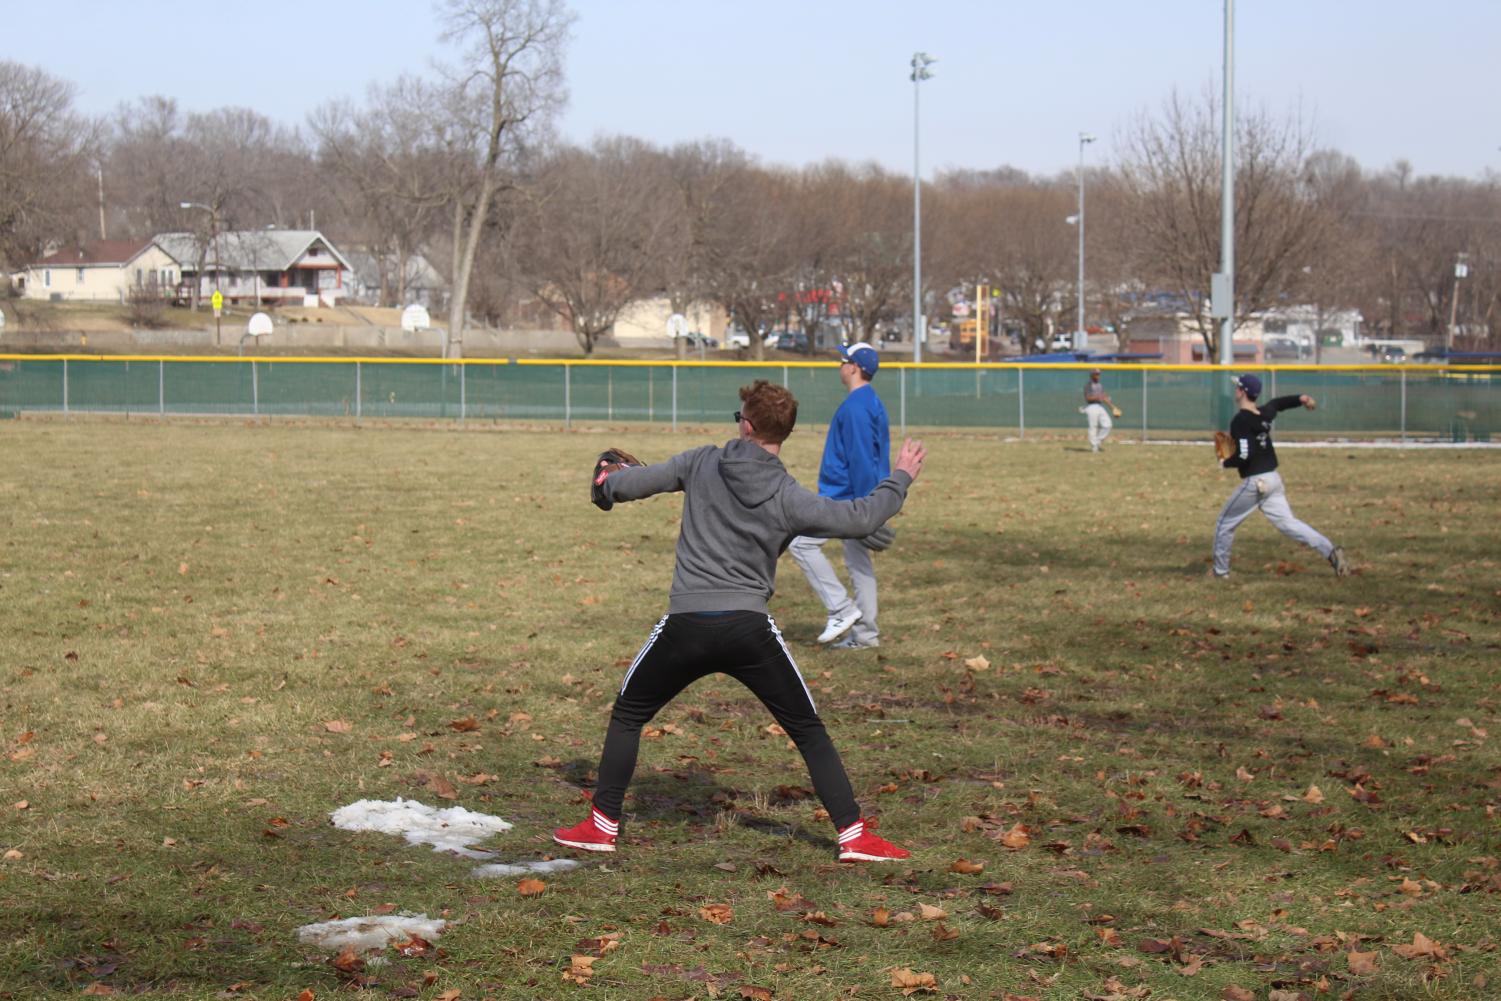 Blake Heuertz, 12, plays catch with one of his teammates to warm up on Mar. 18, 2019.
Photo by Jessica Stacy